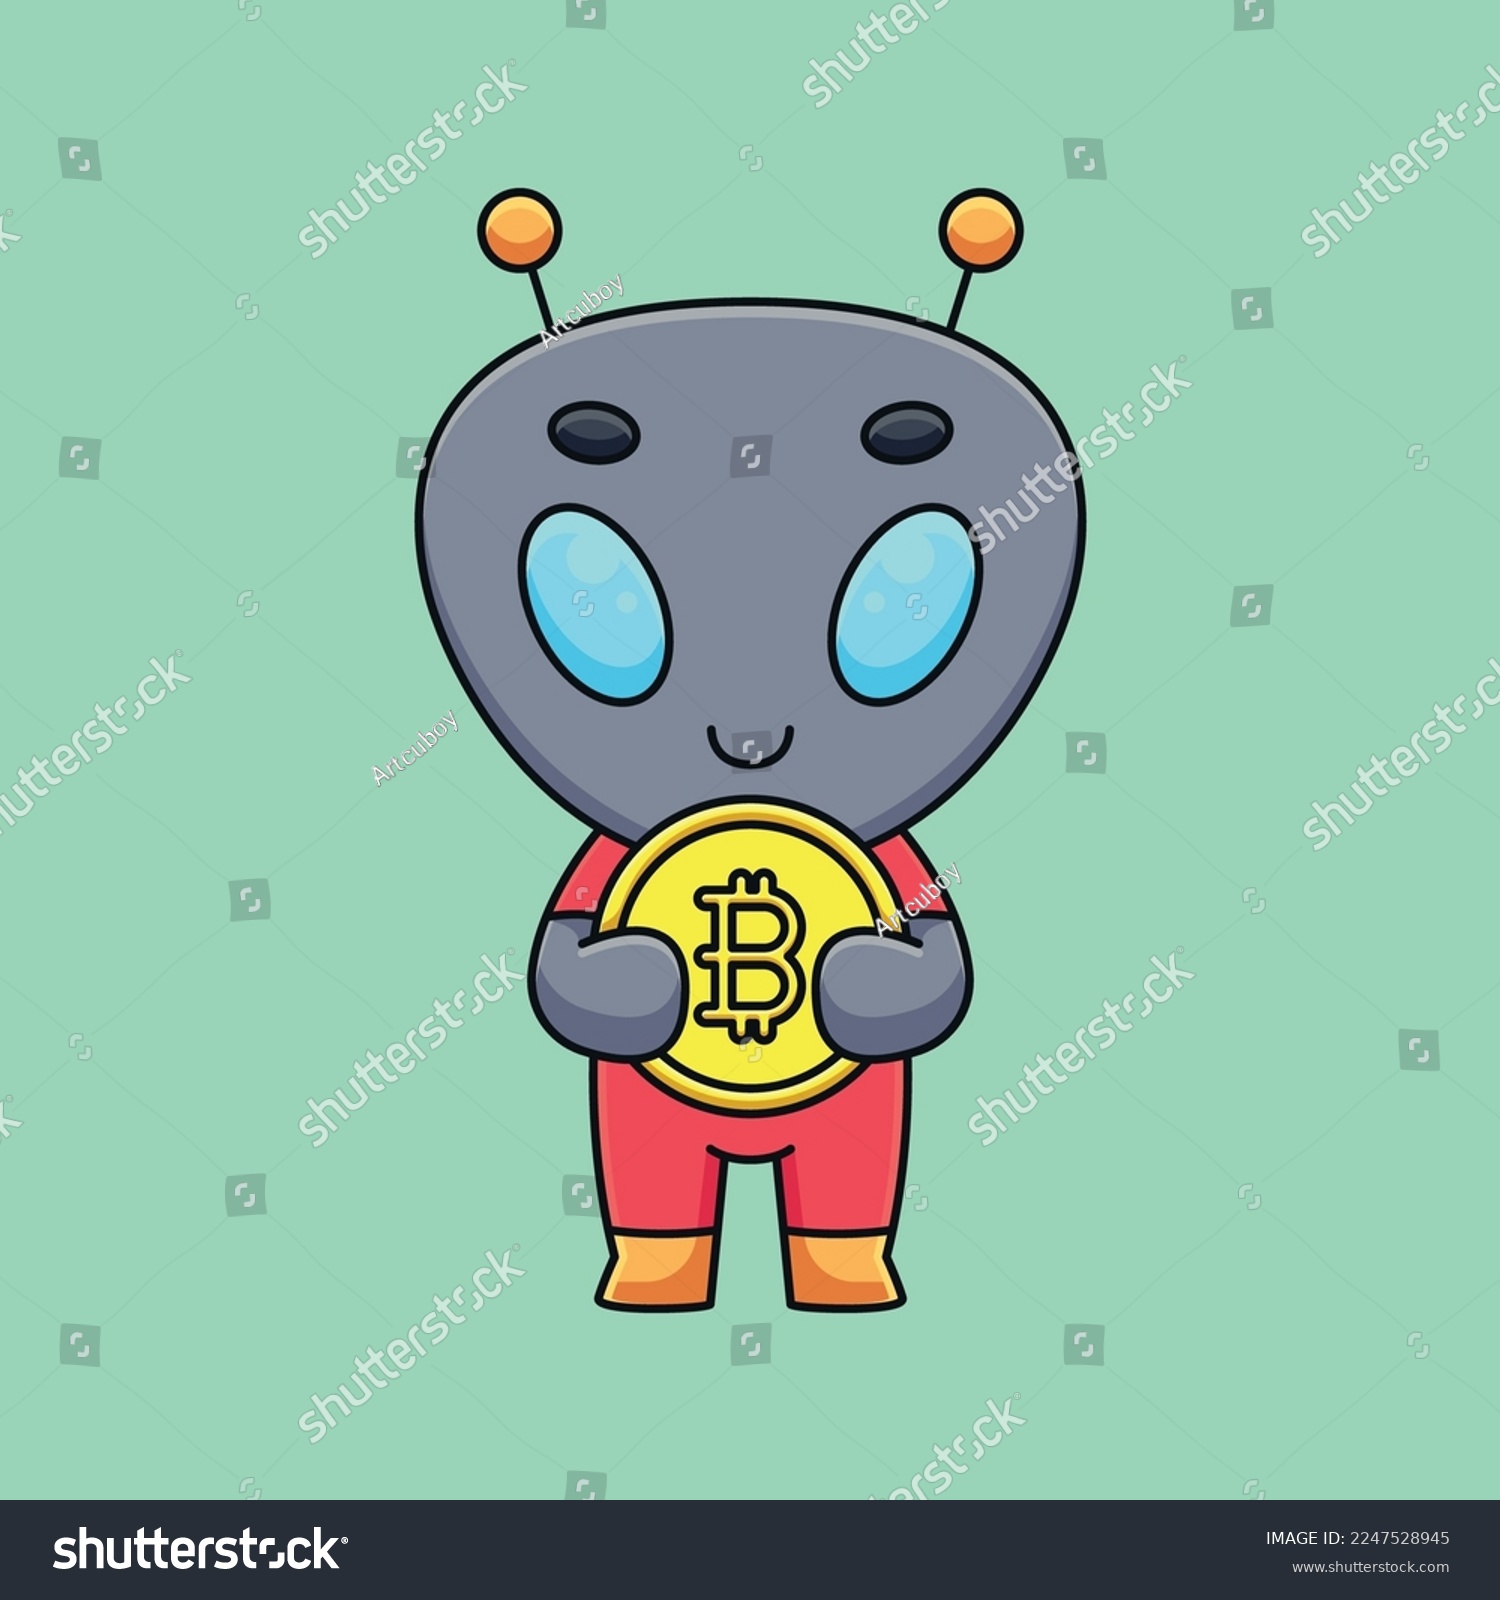 SVG of Adorable alien holds a shiny bitcoin in its hand, gazing curiously at the future of currency. Who knows what new worlds it will unlock! svg